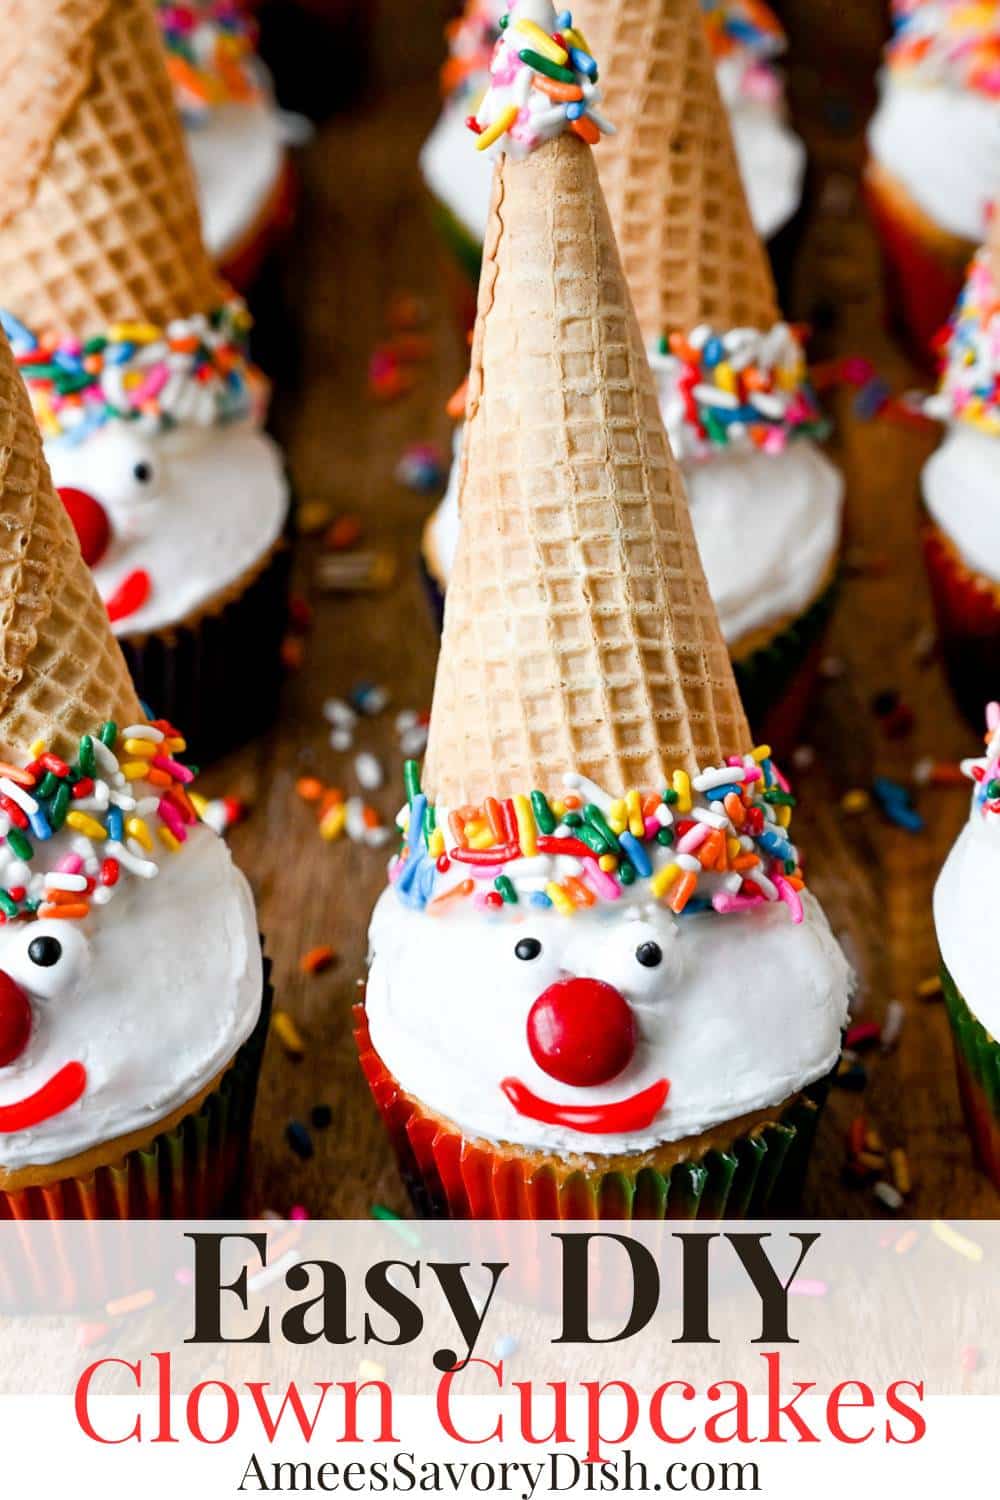 A simple recipe for making carnival clown cupcakes using ice cream cones, M&M's, colored frosting, candy melts, and sprinkles. via @Ameessavorydish